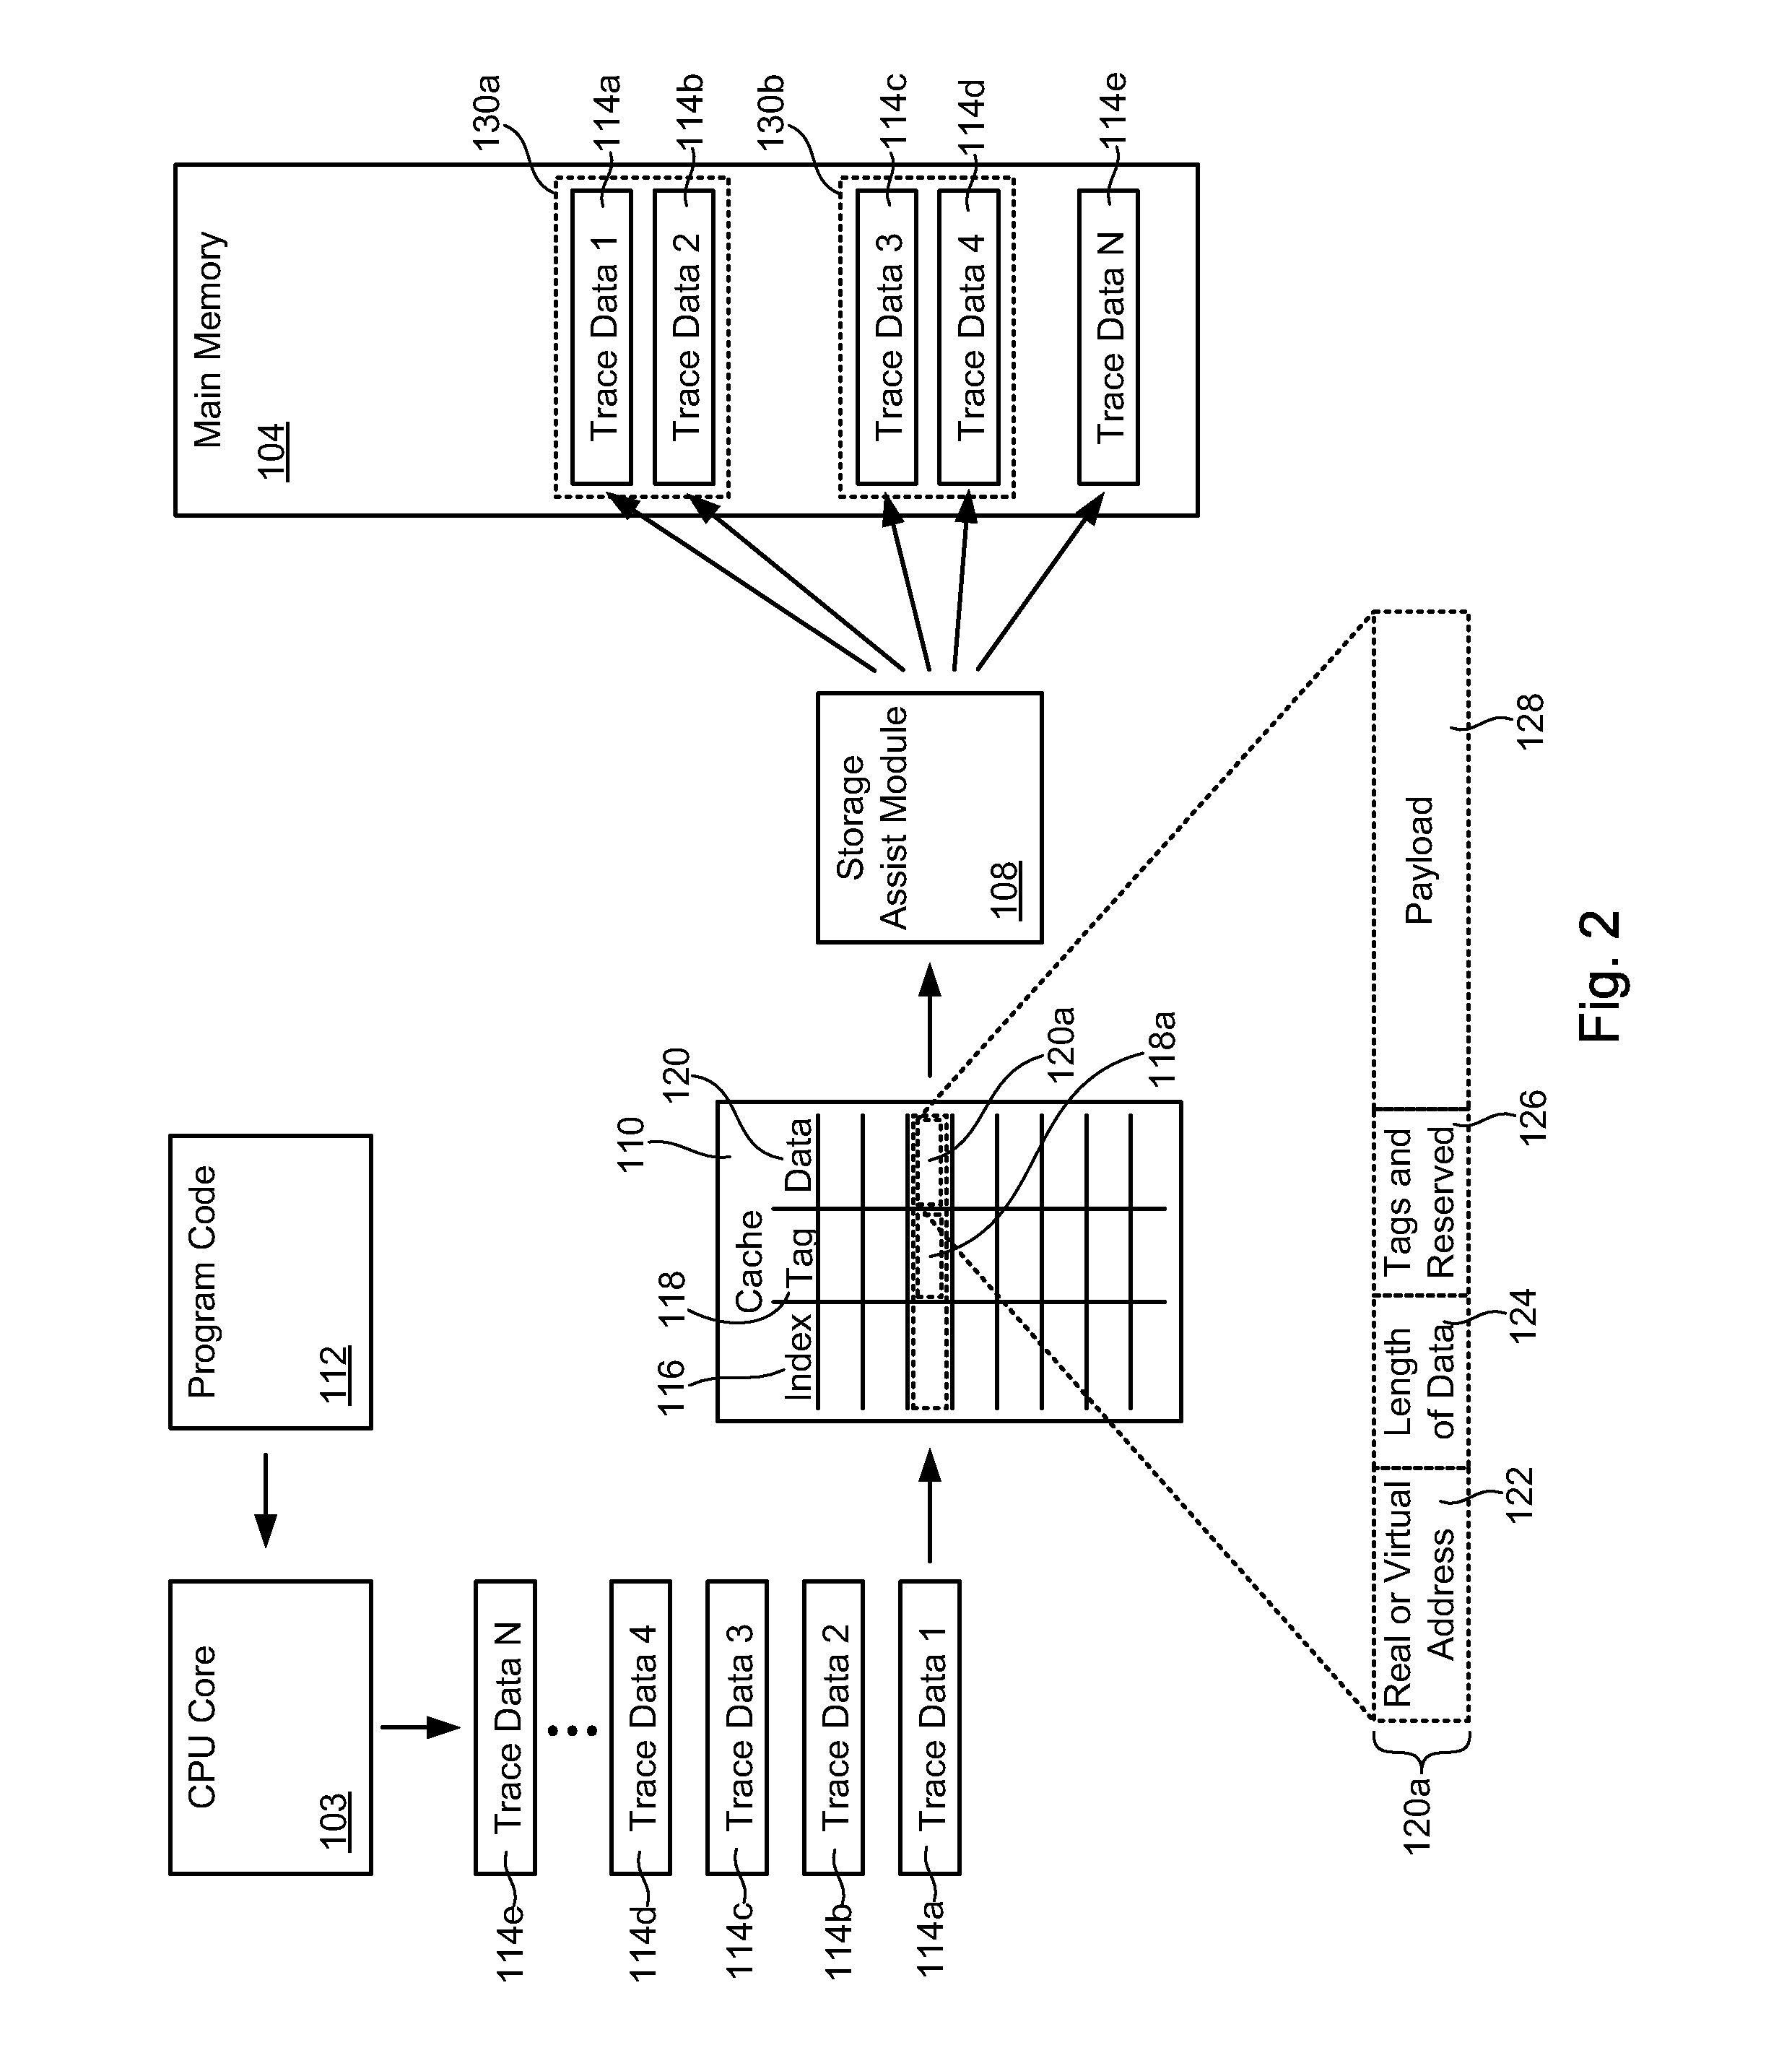 Assisted trace facility to improve CPU cache performance